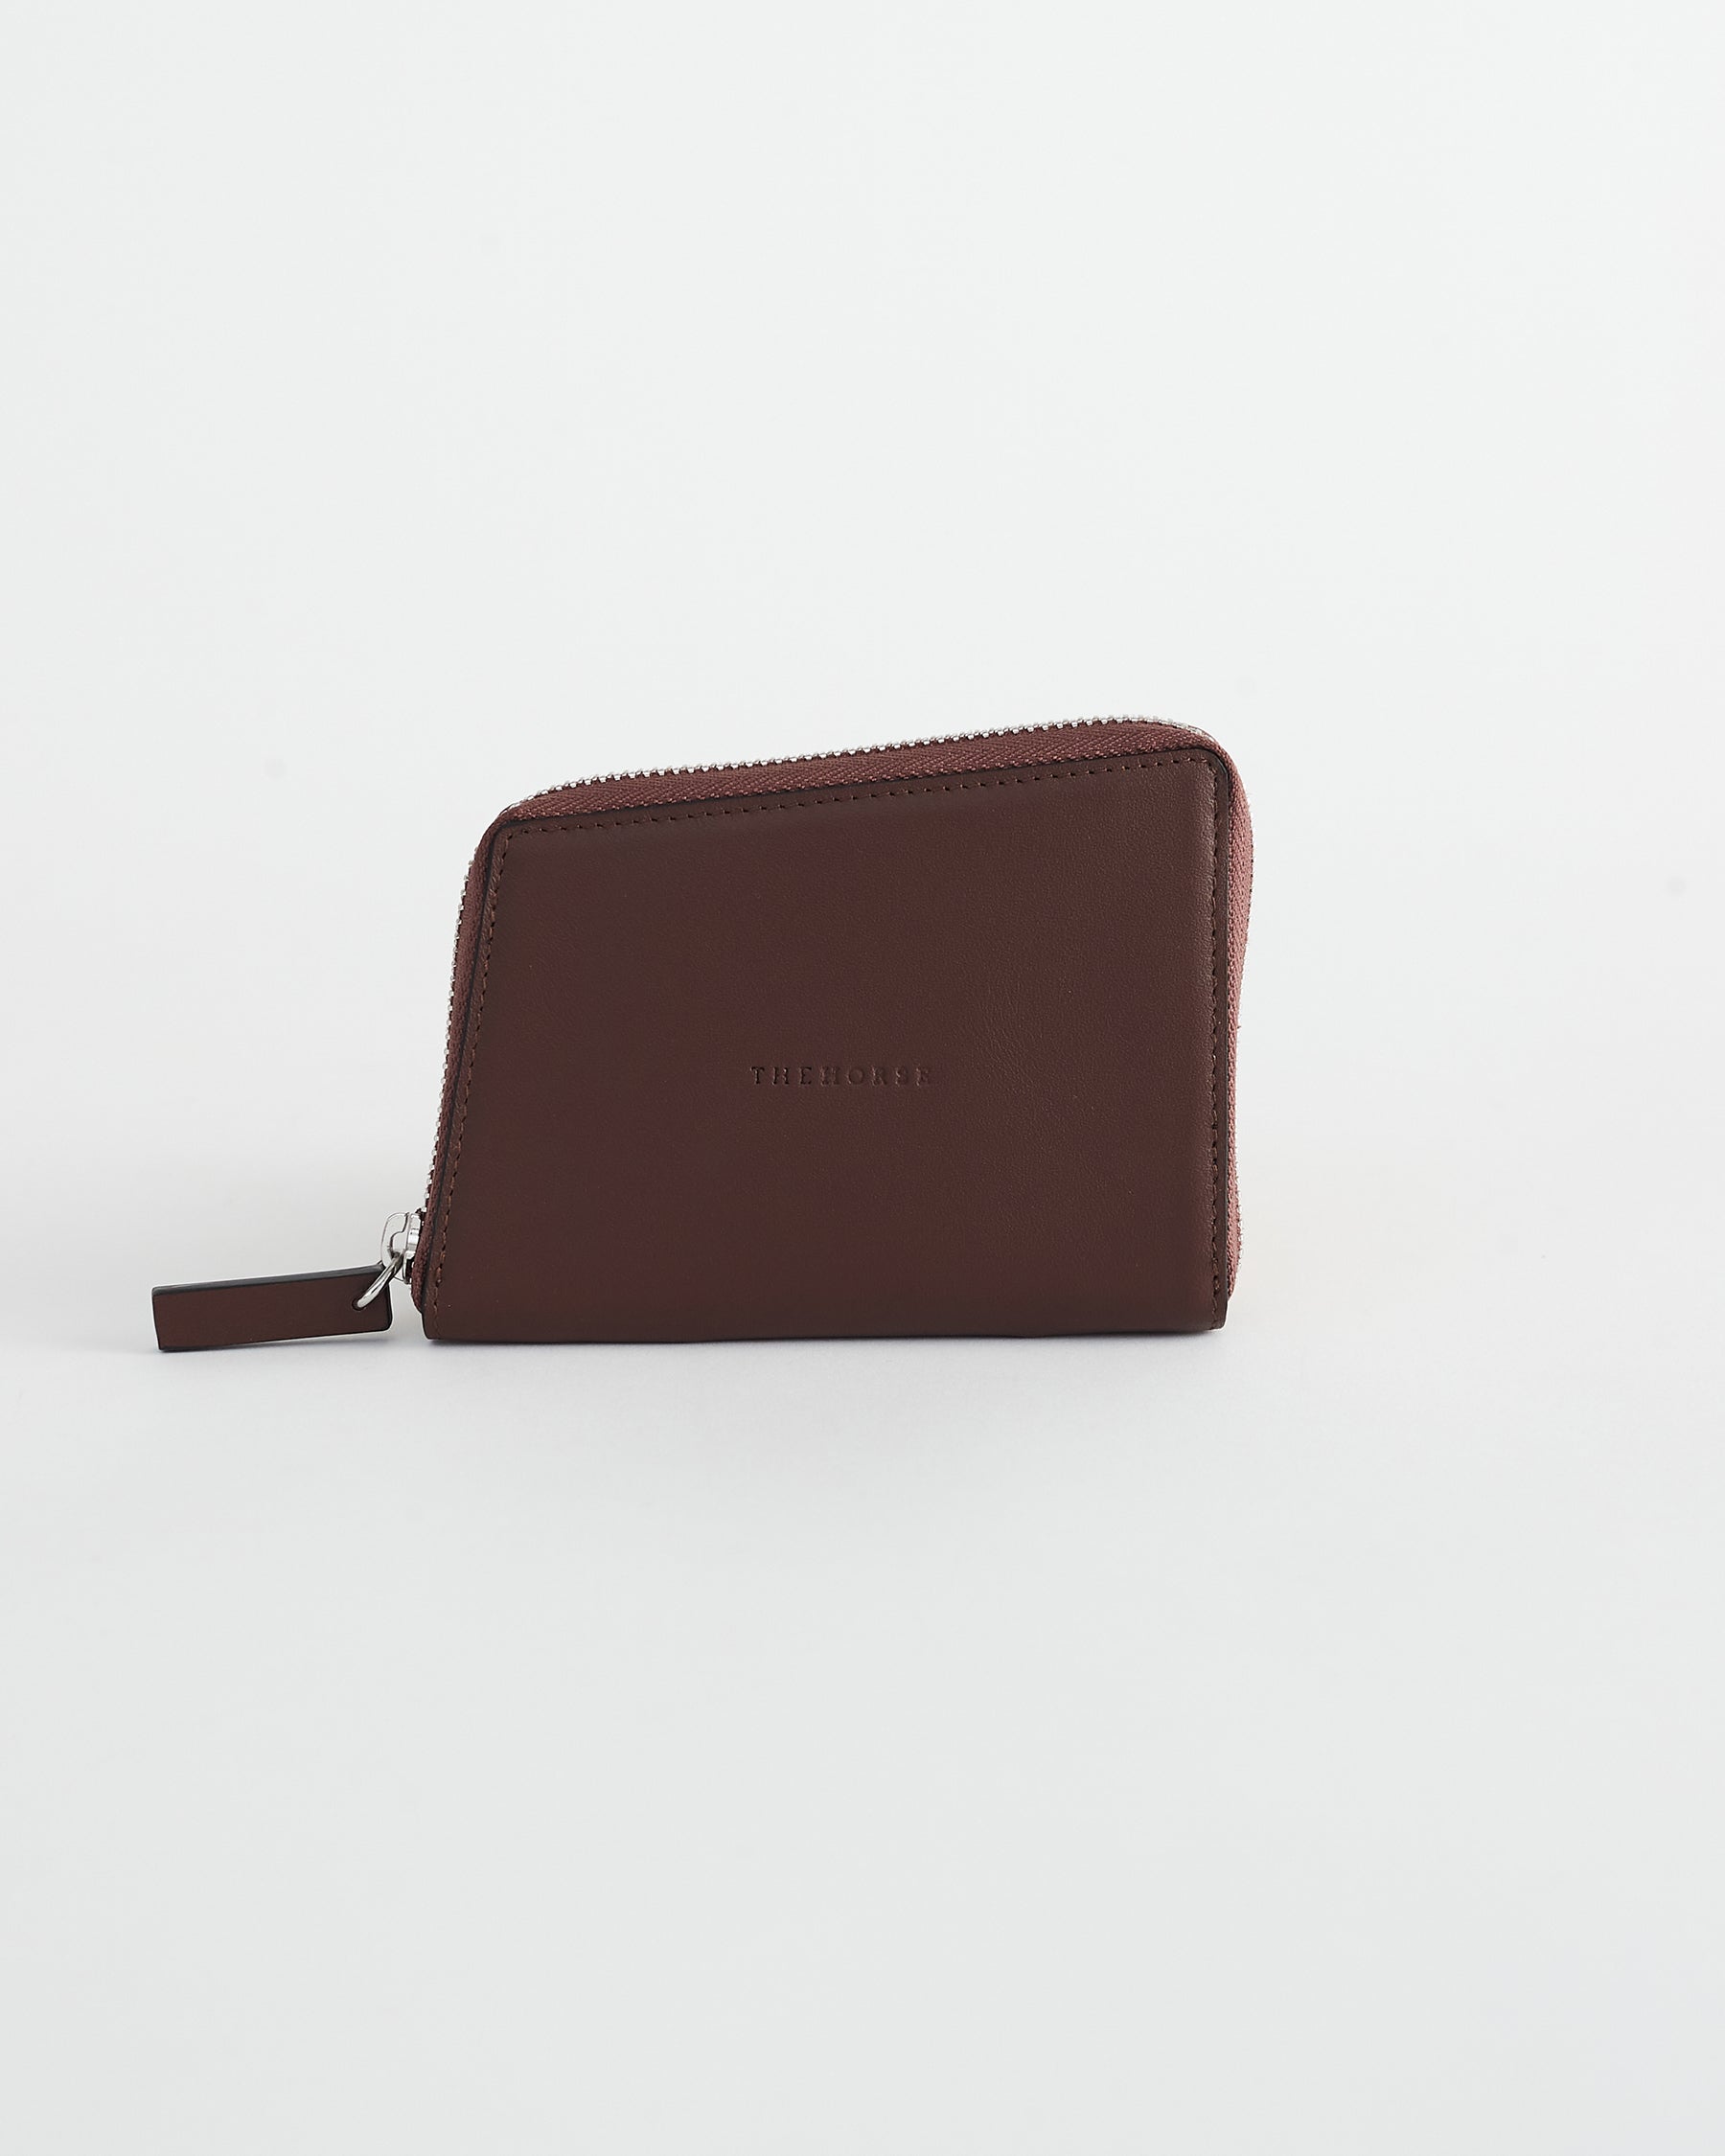 The Bo Women's Compact Leather Zip Wallet in Coffee by The Horse®